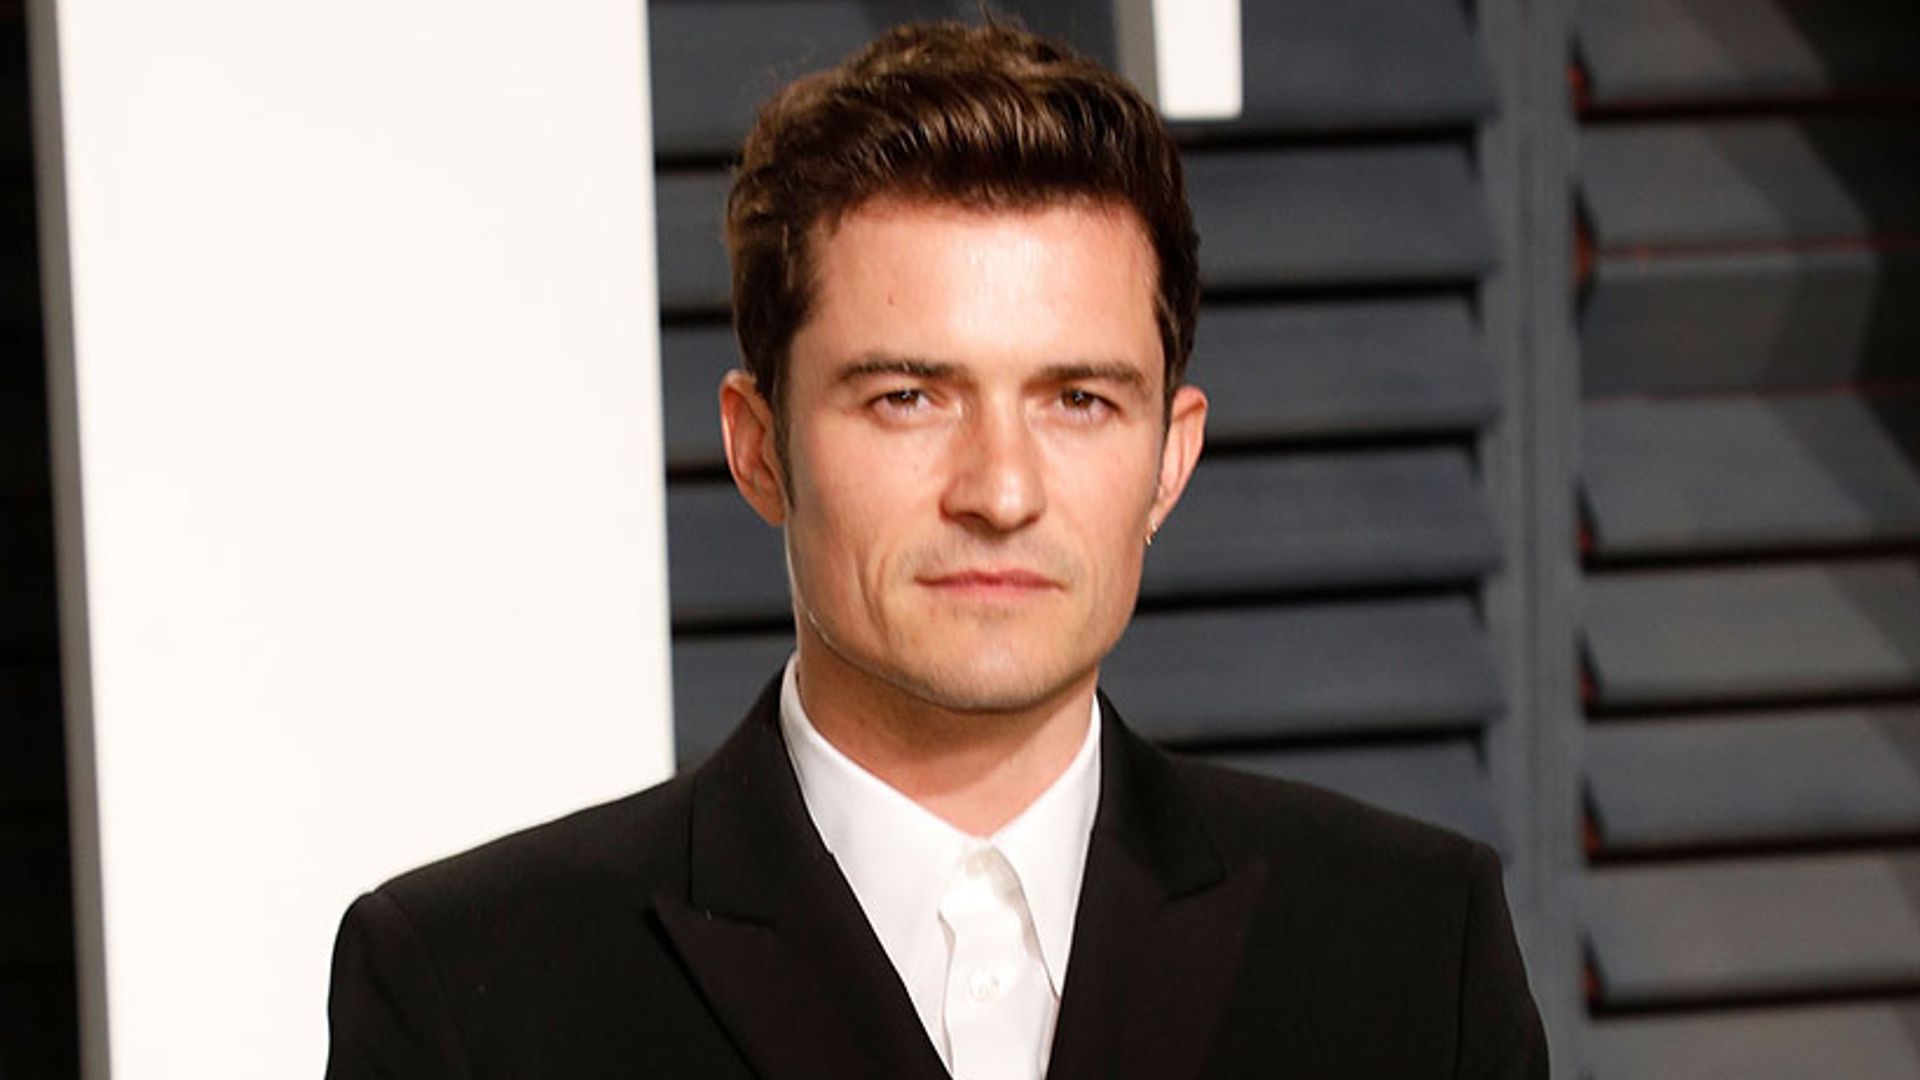 Orlando Bloom puts Katy Perry split behind him and attends Chris Martin's themed party